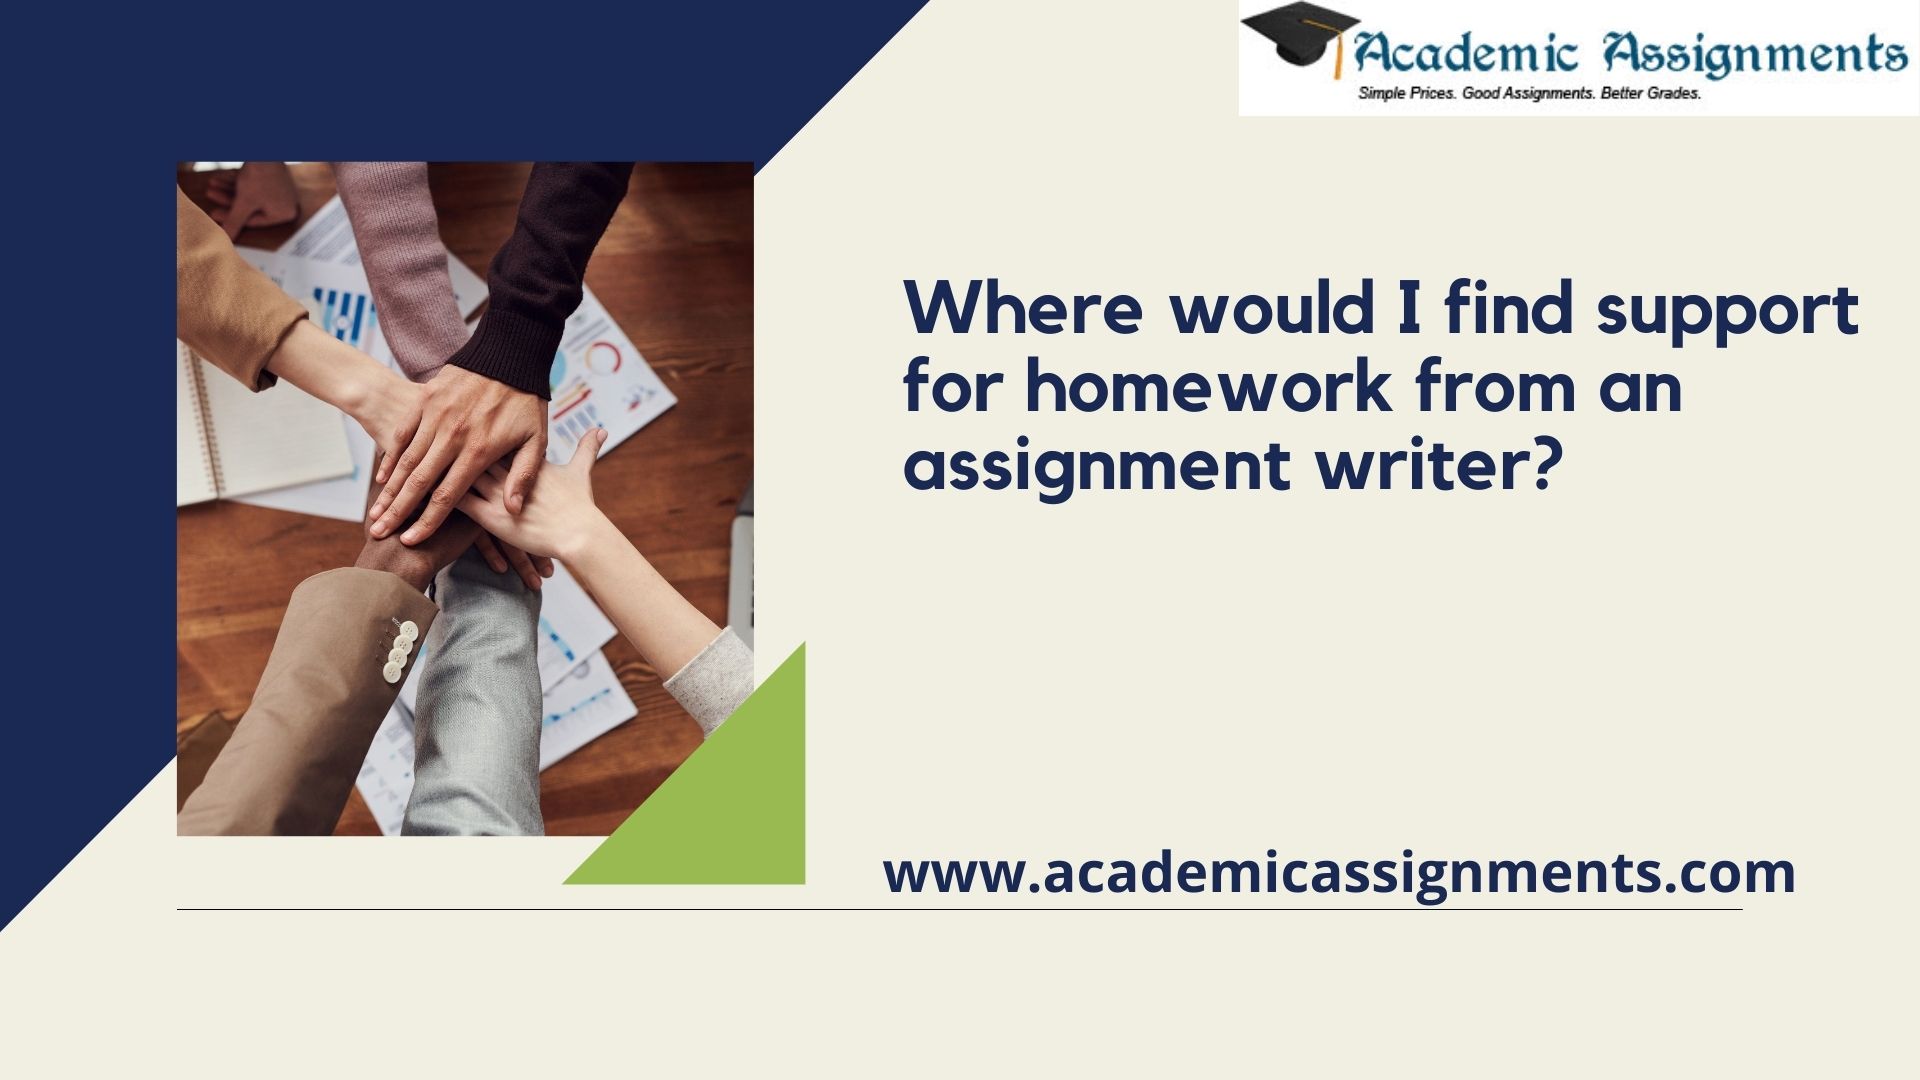 Where would I find support for homework from an assignment writer